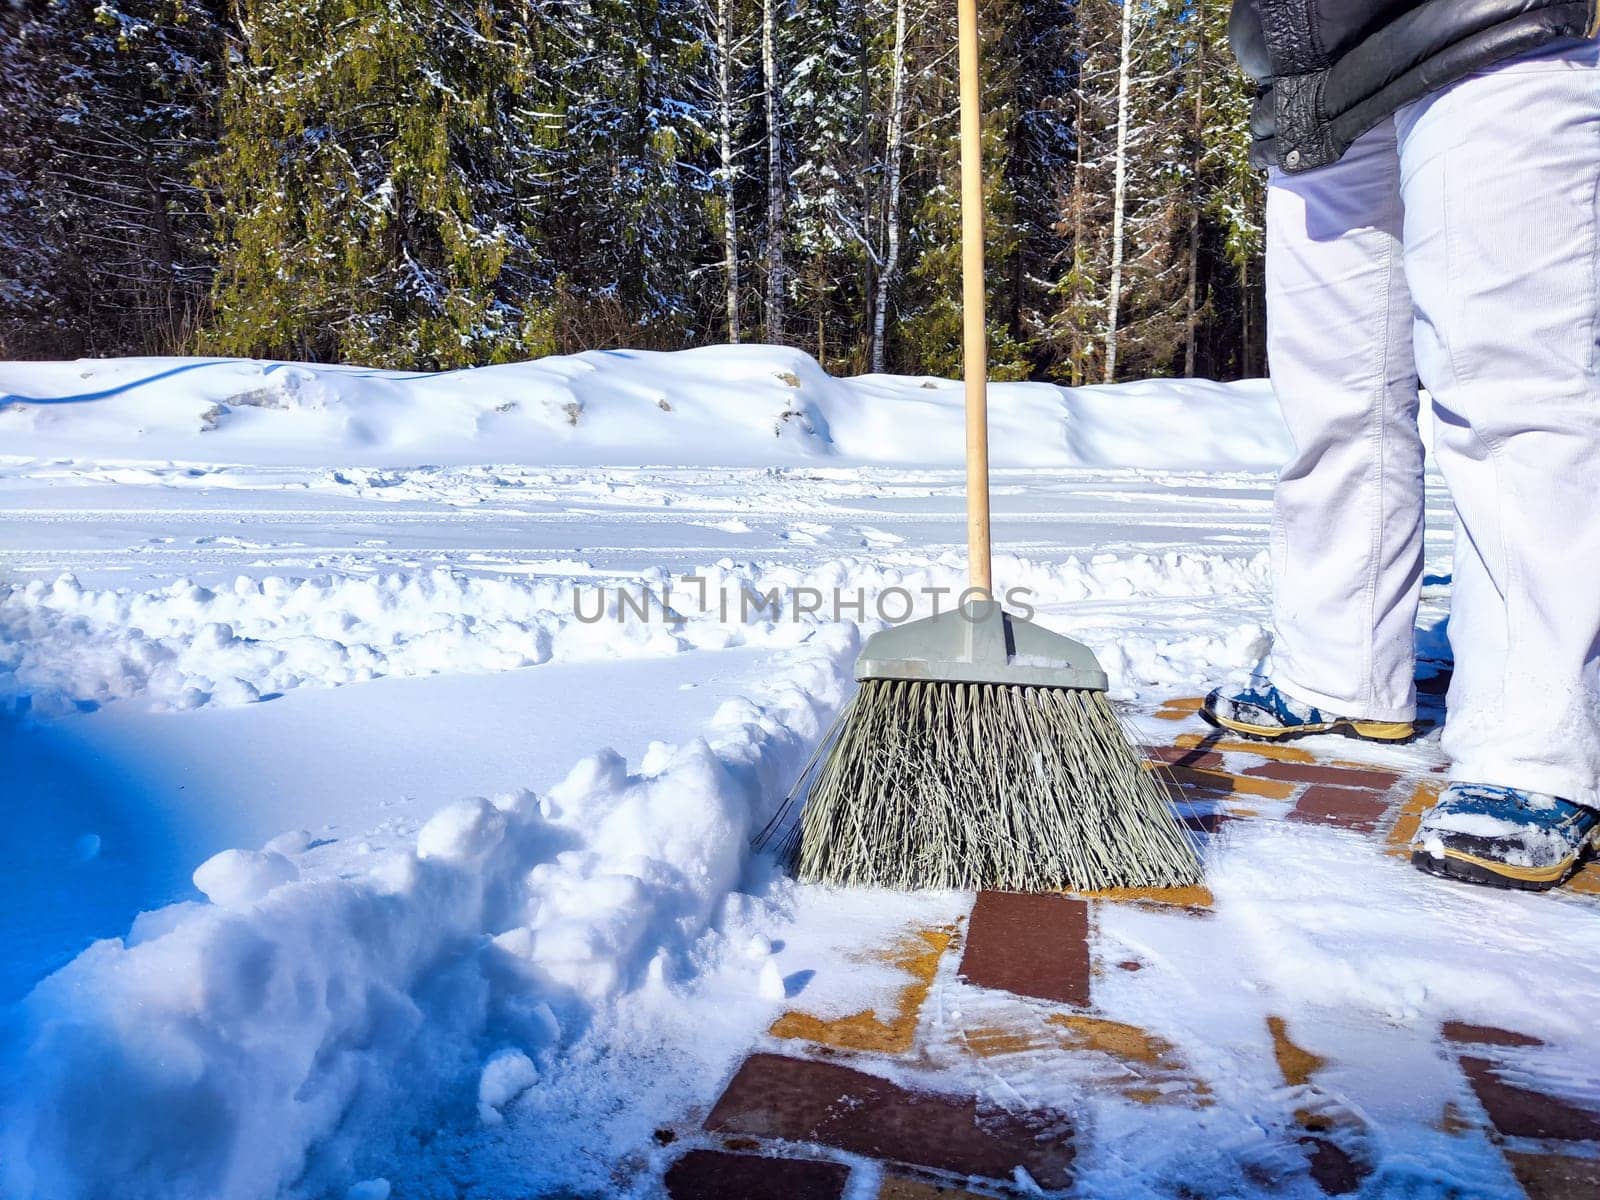 Clearing Snow From Sunny Yard With Broom. Person sweeps fresh snow off the brick path in front of house